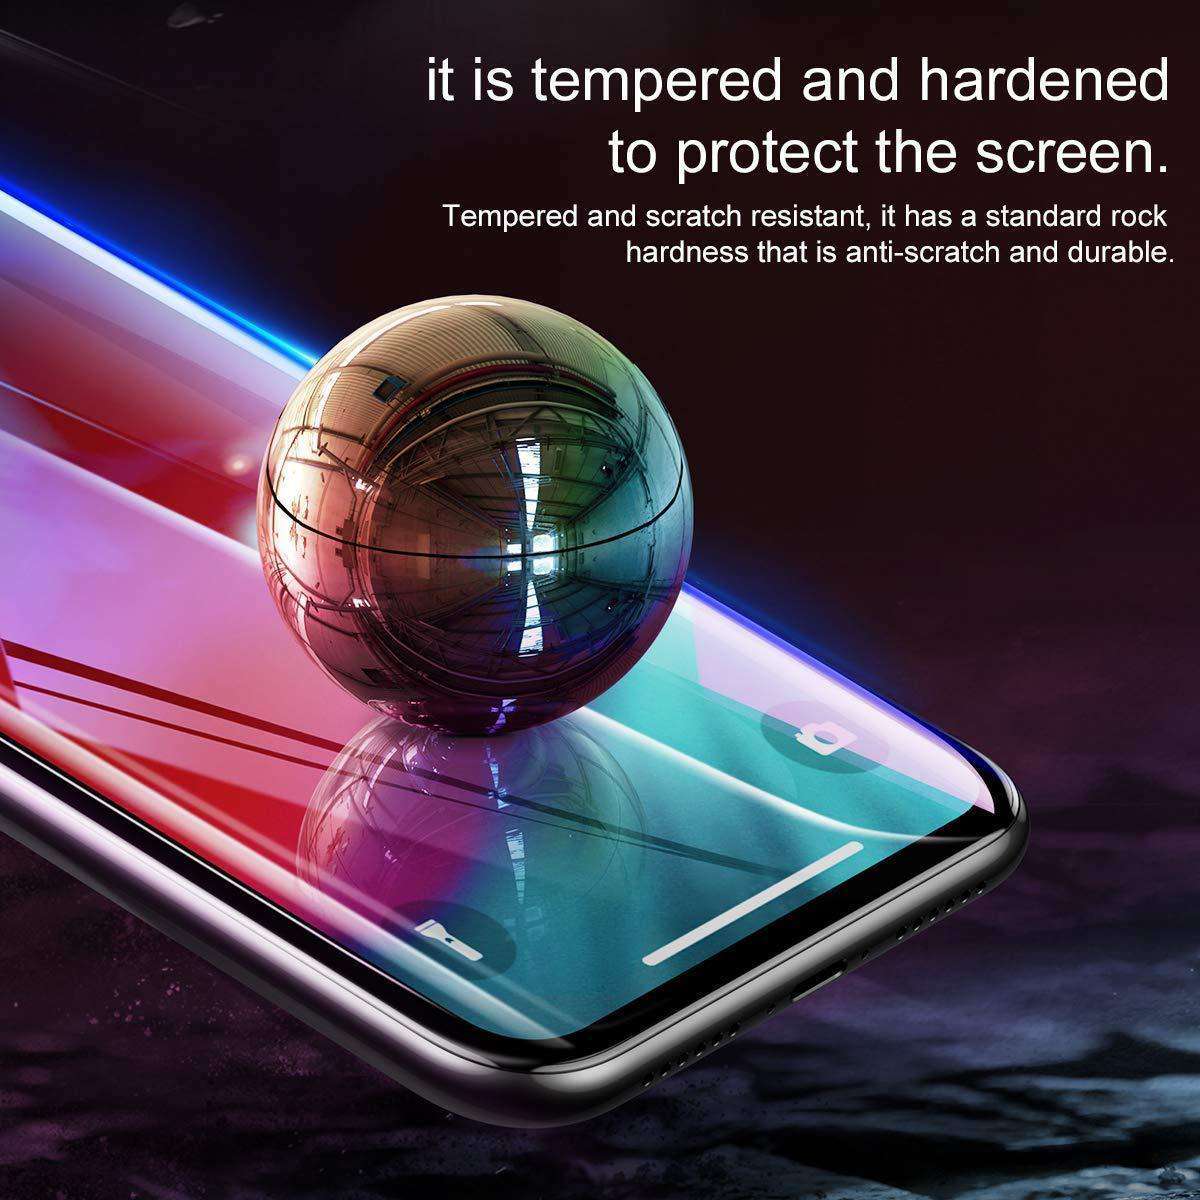 MoArmouz - Curved Tempered Glass Screen Protector for iPhone 11 Pro Max